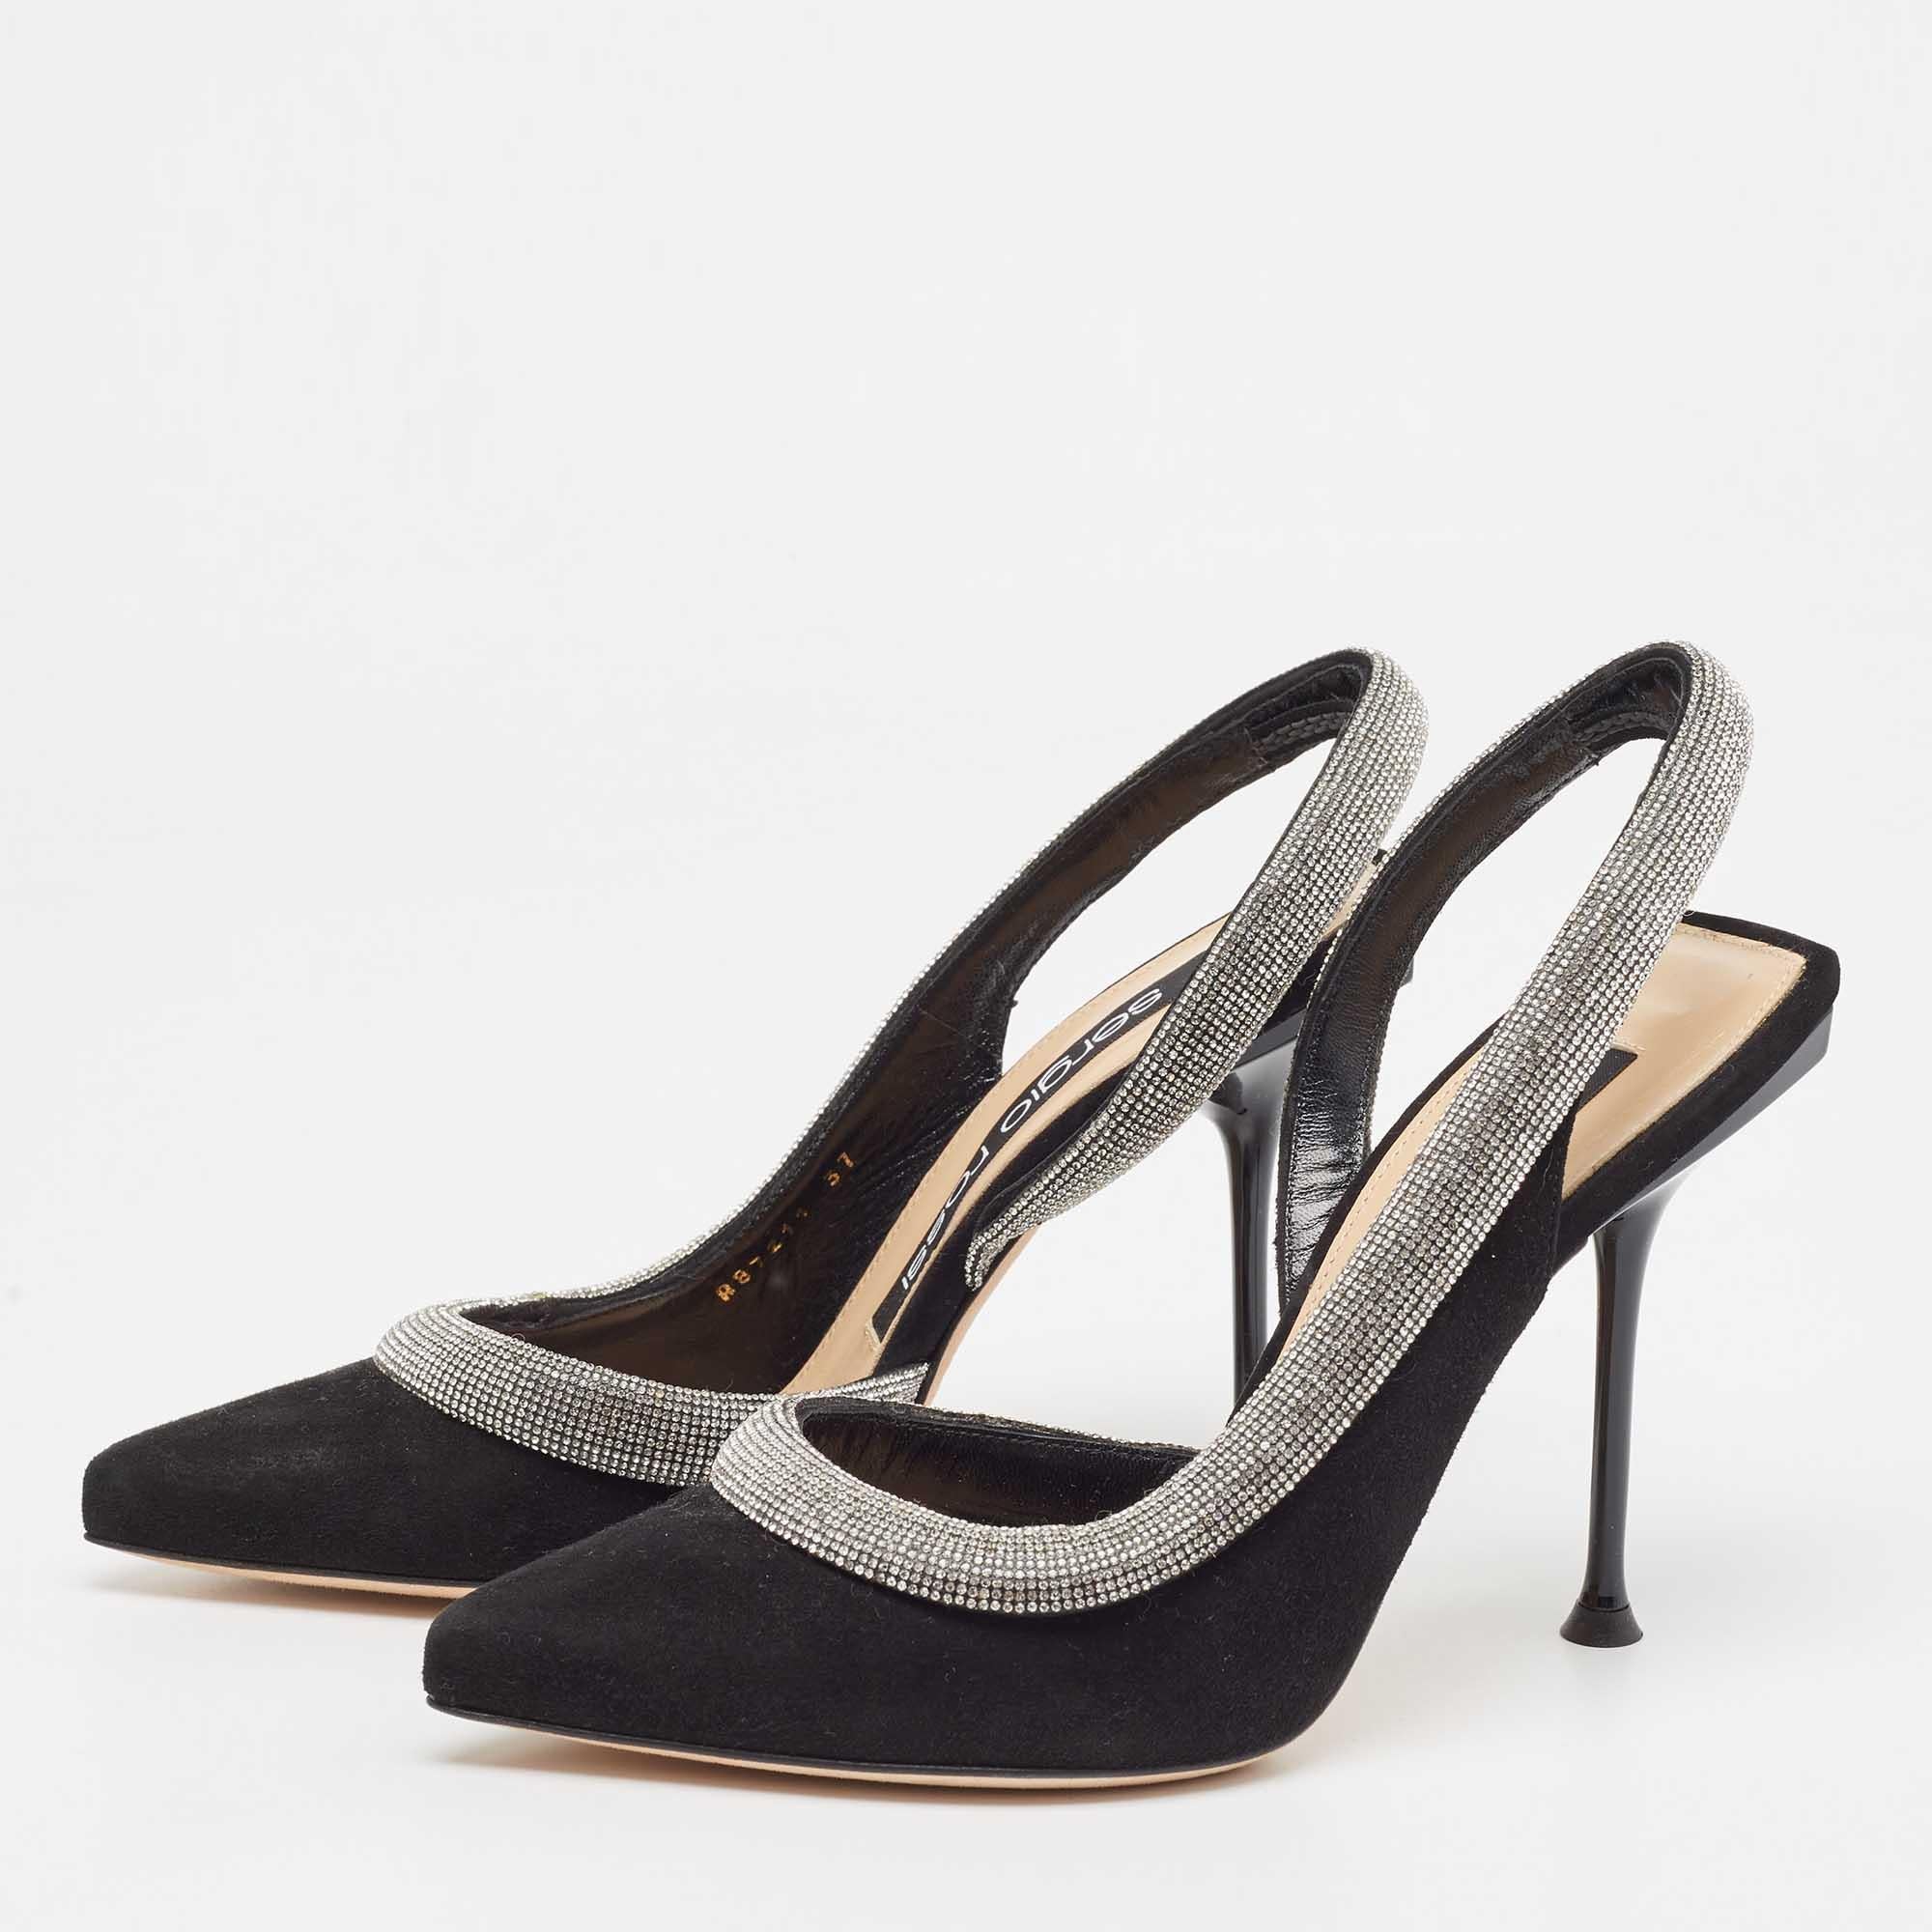 Exhibit an elegant style with this pair of pumps. These Sergio Rossi slingbacks for women are crafted from quality materials. They are set on durable soles and sleek heels.

